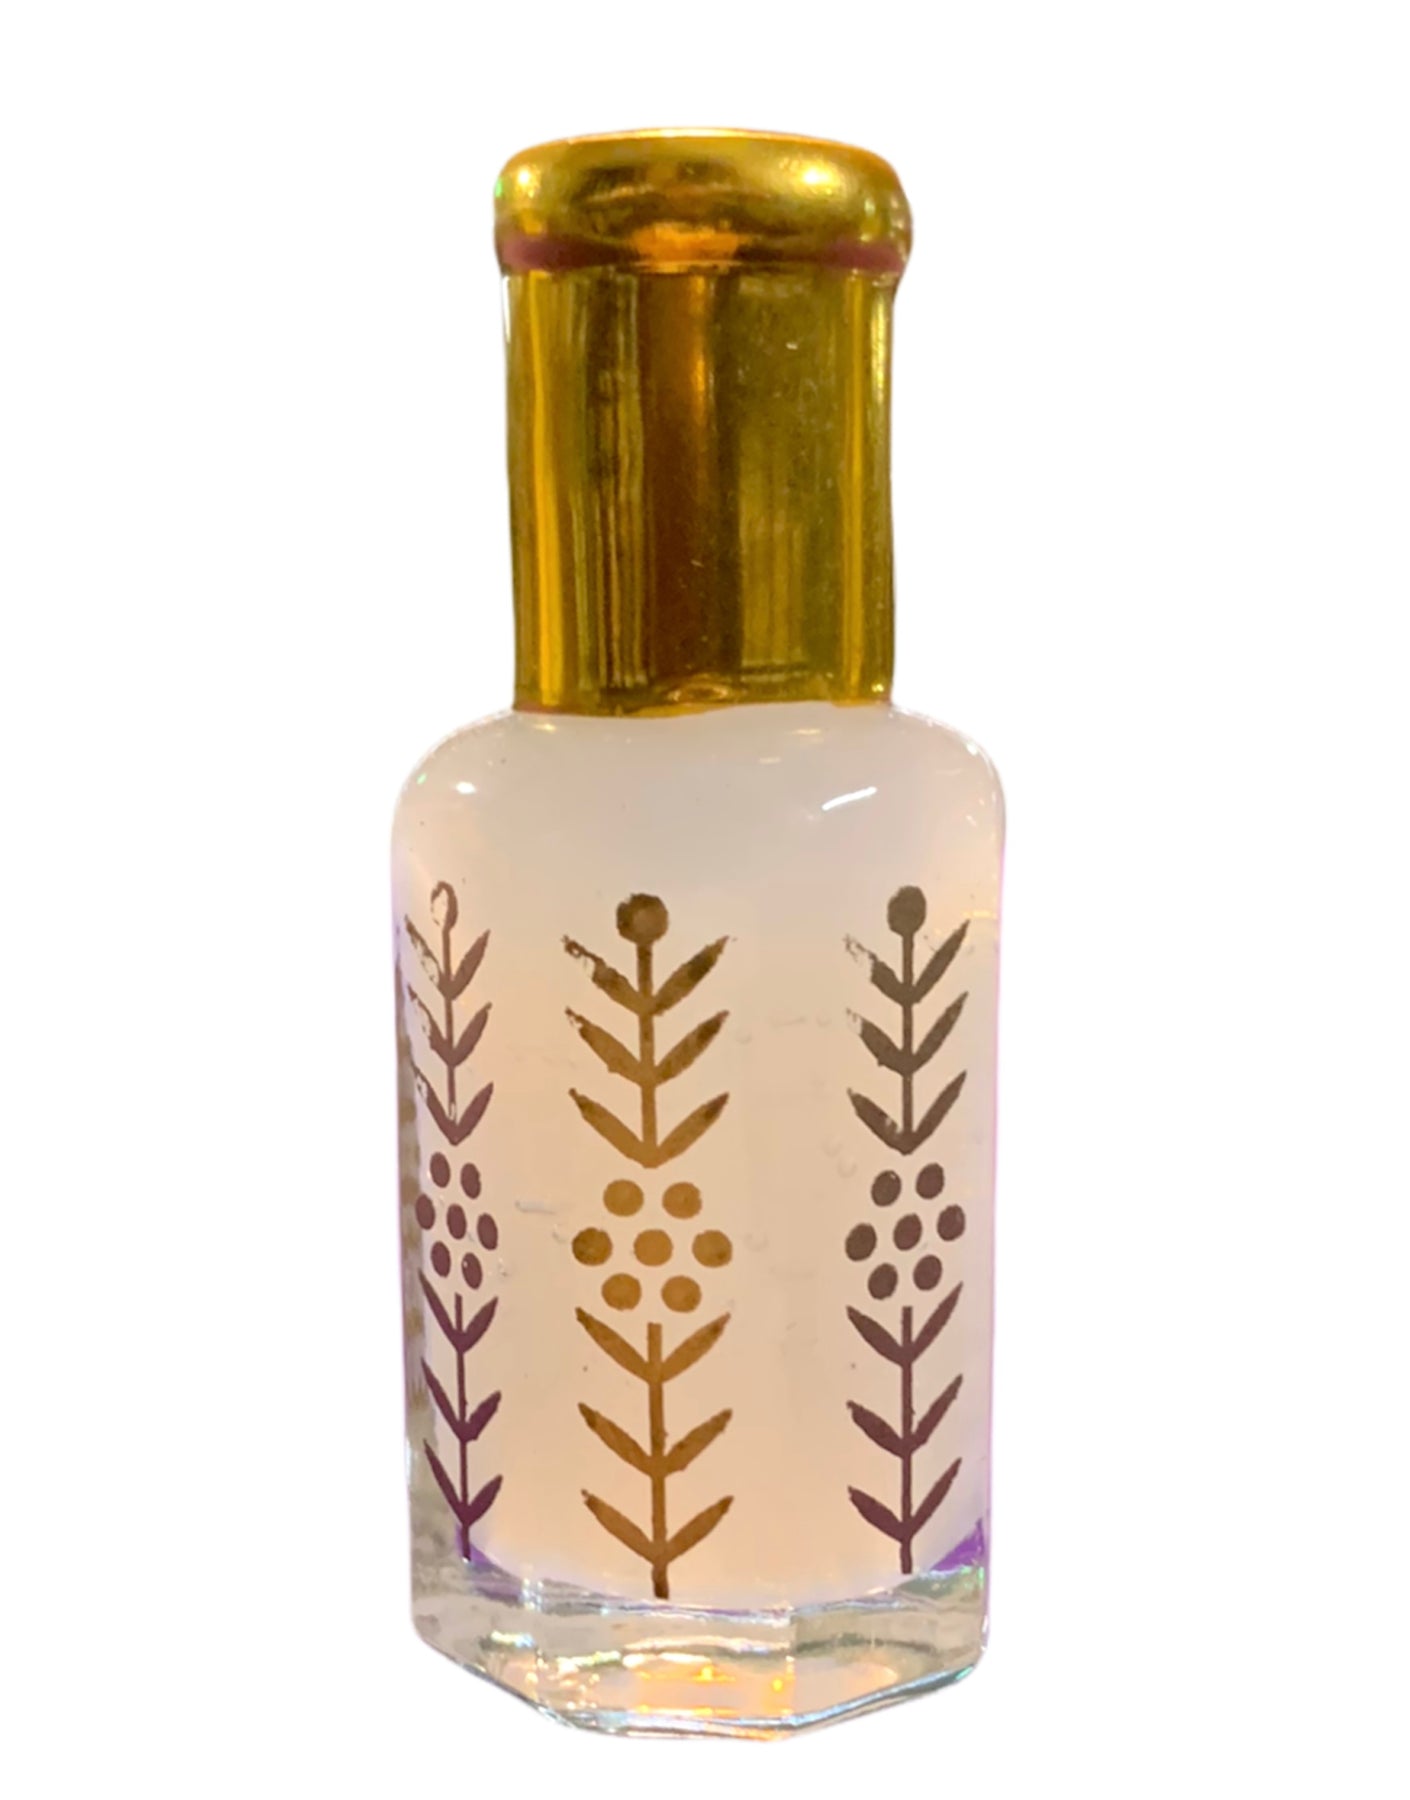 Golden Sand Tahara Concentrated Fragrance